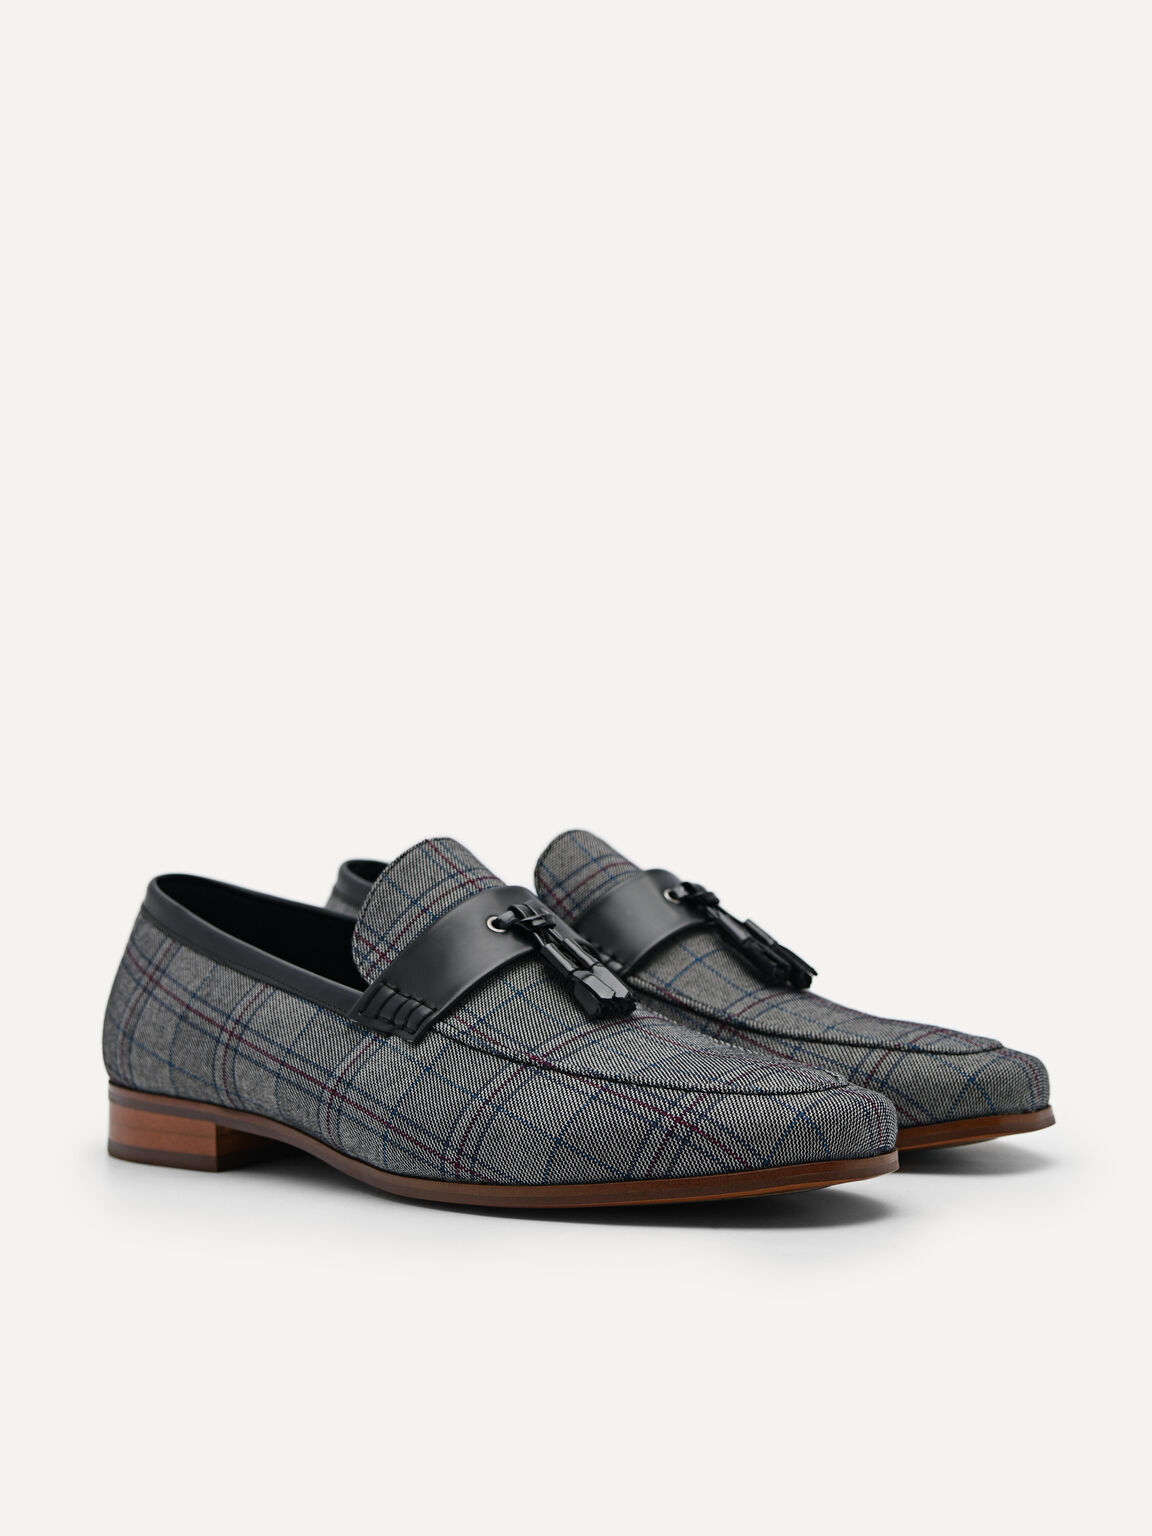 Penny Loafers with Tassels, Grey